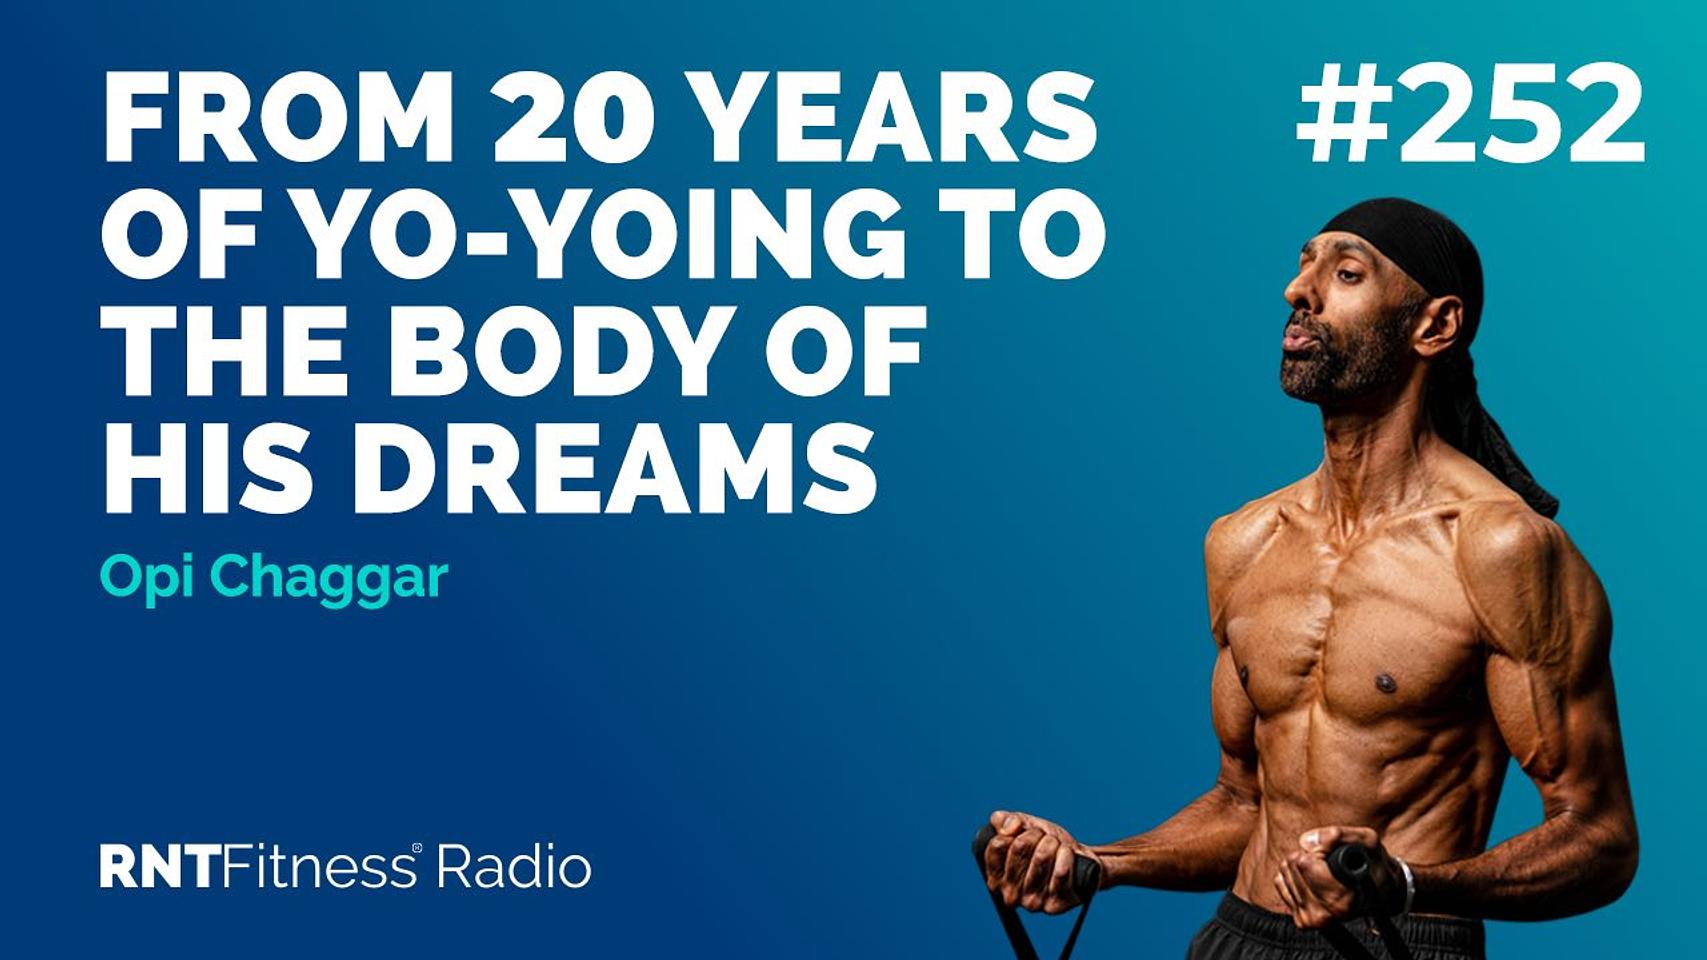 Ep. 252 Hall of Fame | Opi Chaggar - From 20 Years Of Yo-Yoing To The Body Of His Dreams